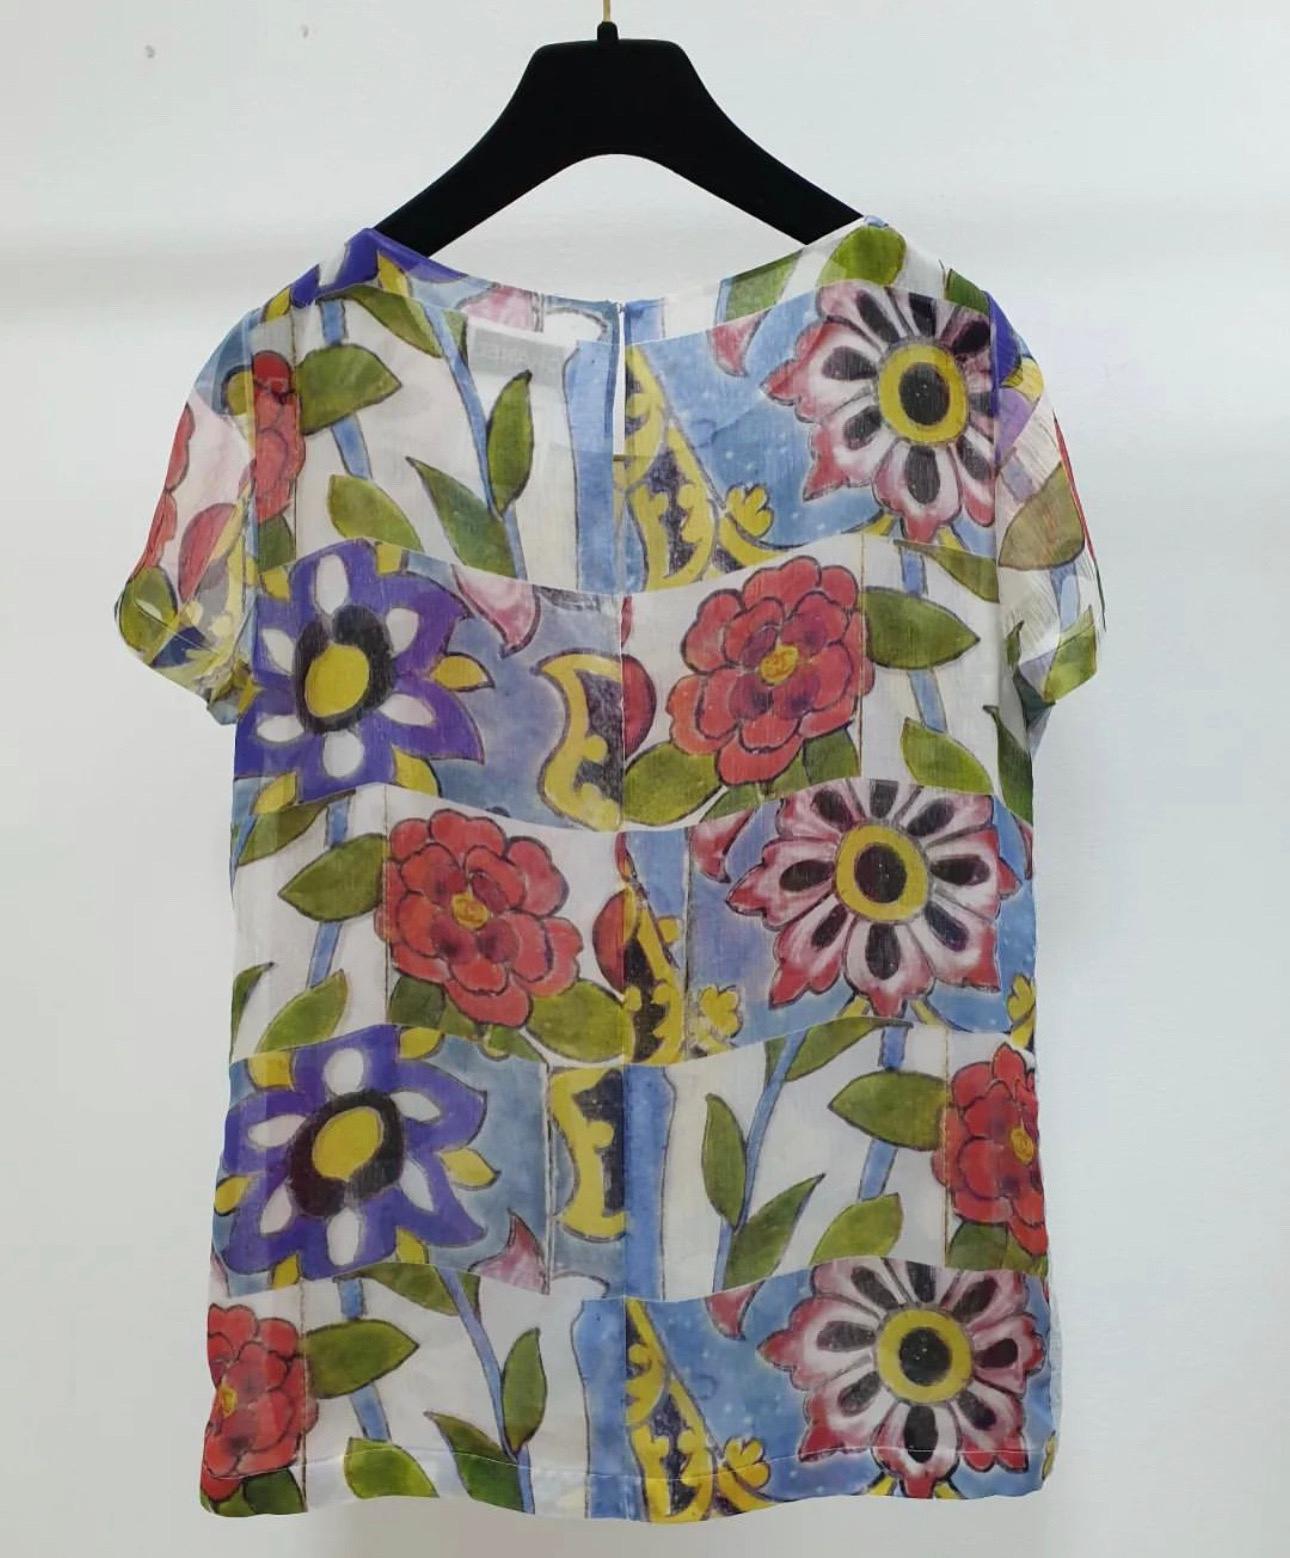 Chanel Multi Color Silk Floral Print Blouse. 
This beautiful Chanel blouse  is in excellent condition. 
There is no sign of use. It is made of 100% silk and has a colorful floral print throughout.  
Sz.38
Hanger is not included